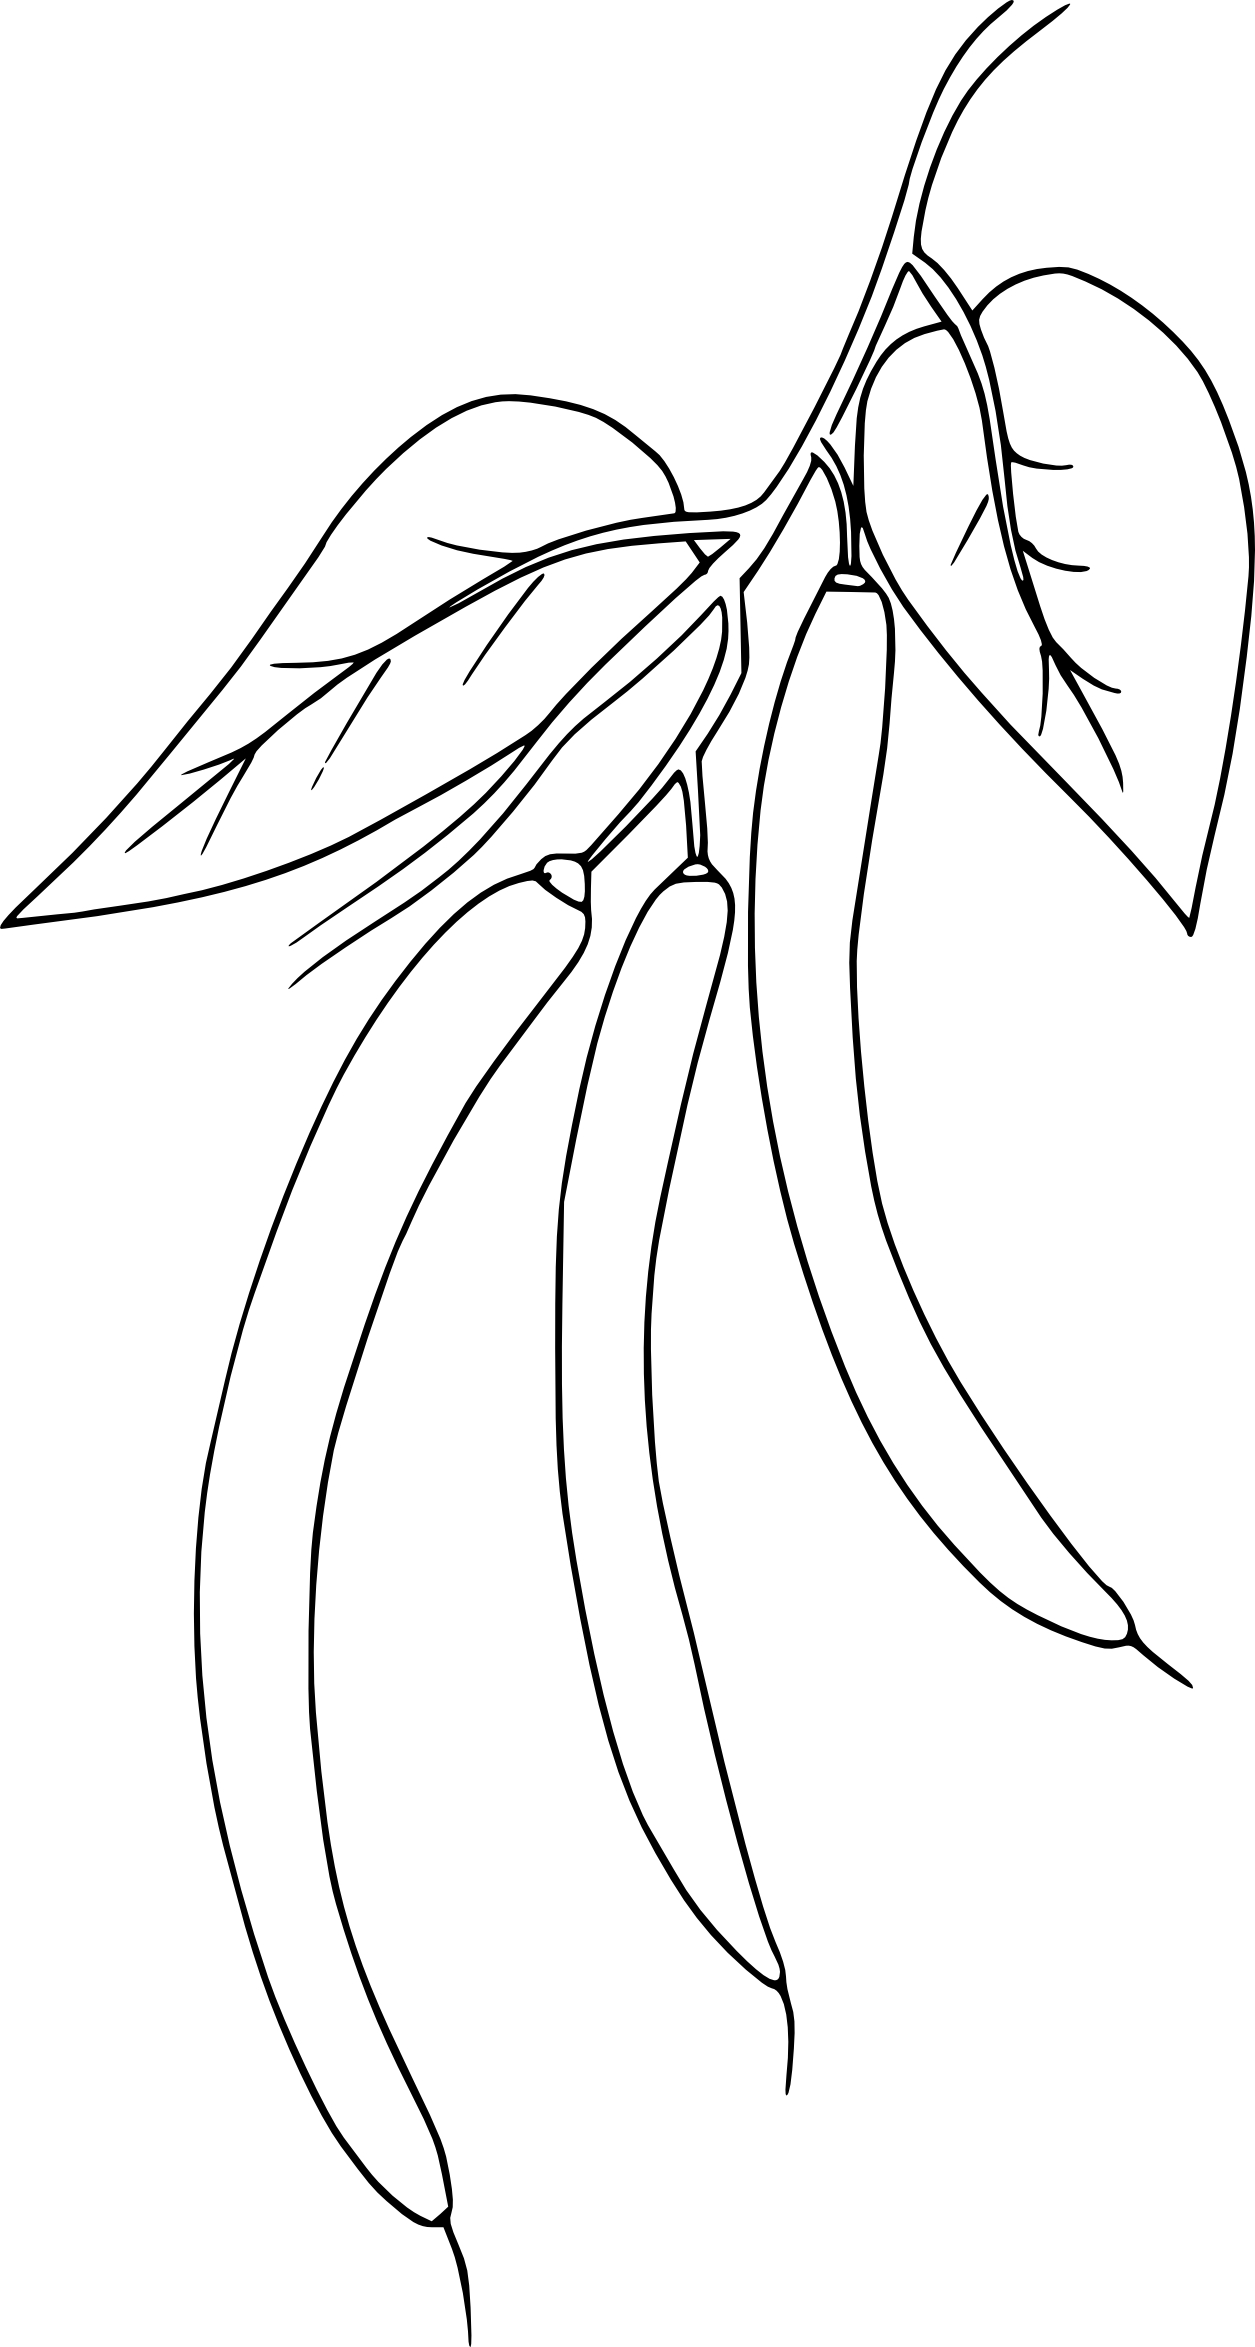 Beans coloring page